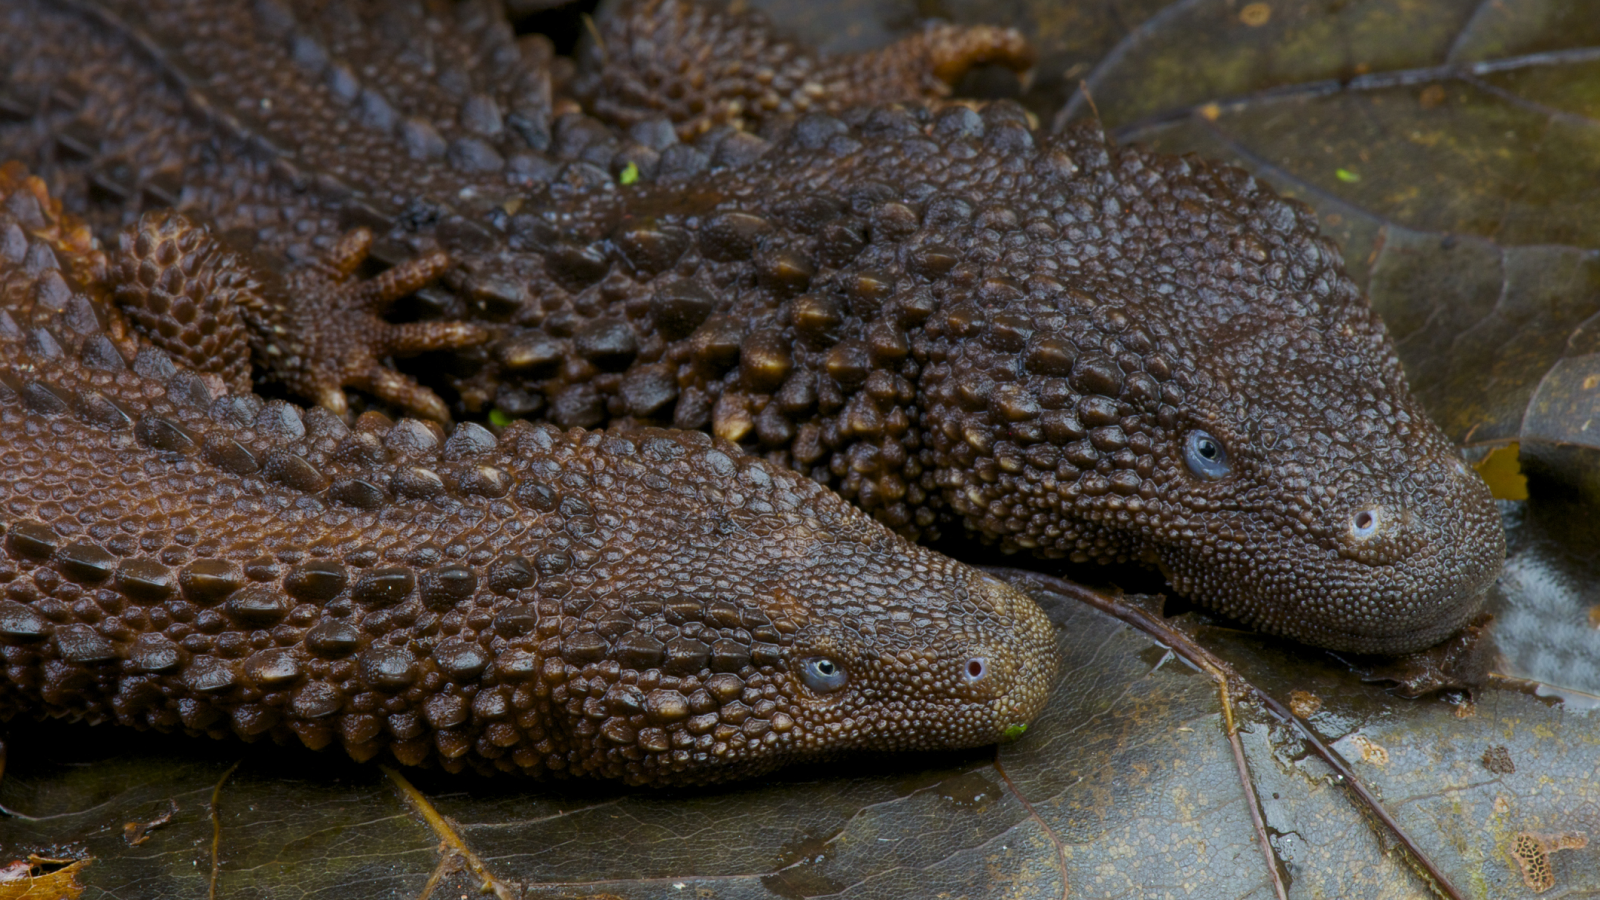 Earless monitor lizards: The 'Holy Grail' of reptiles that looks